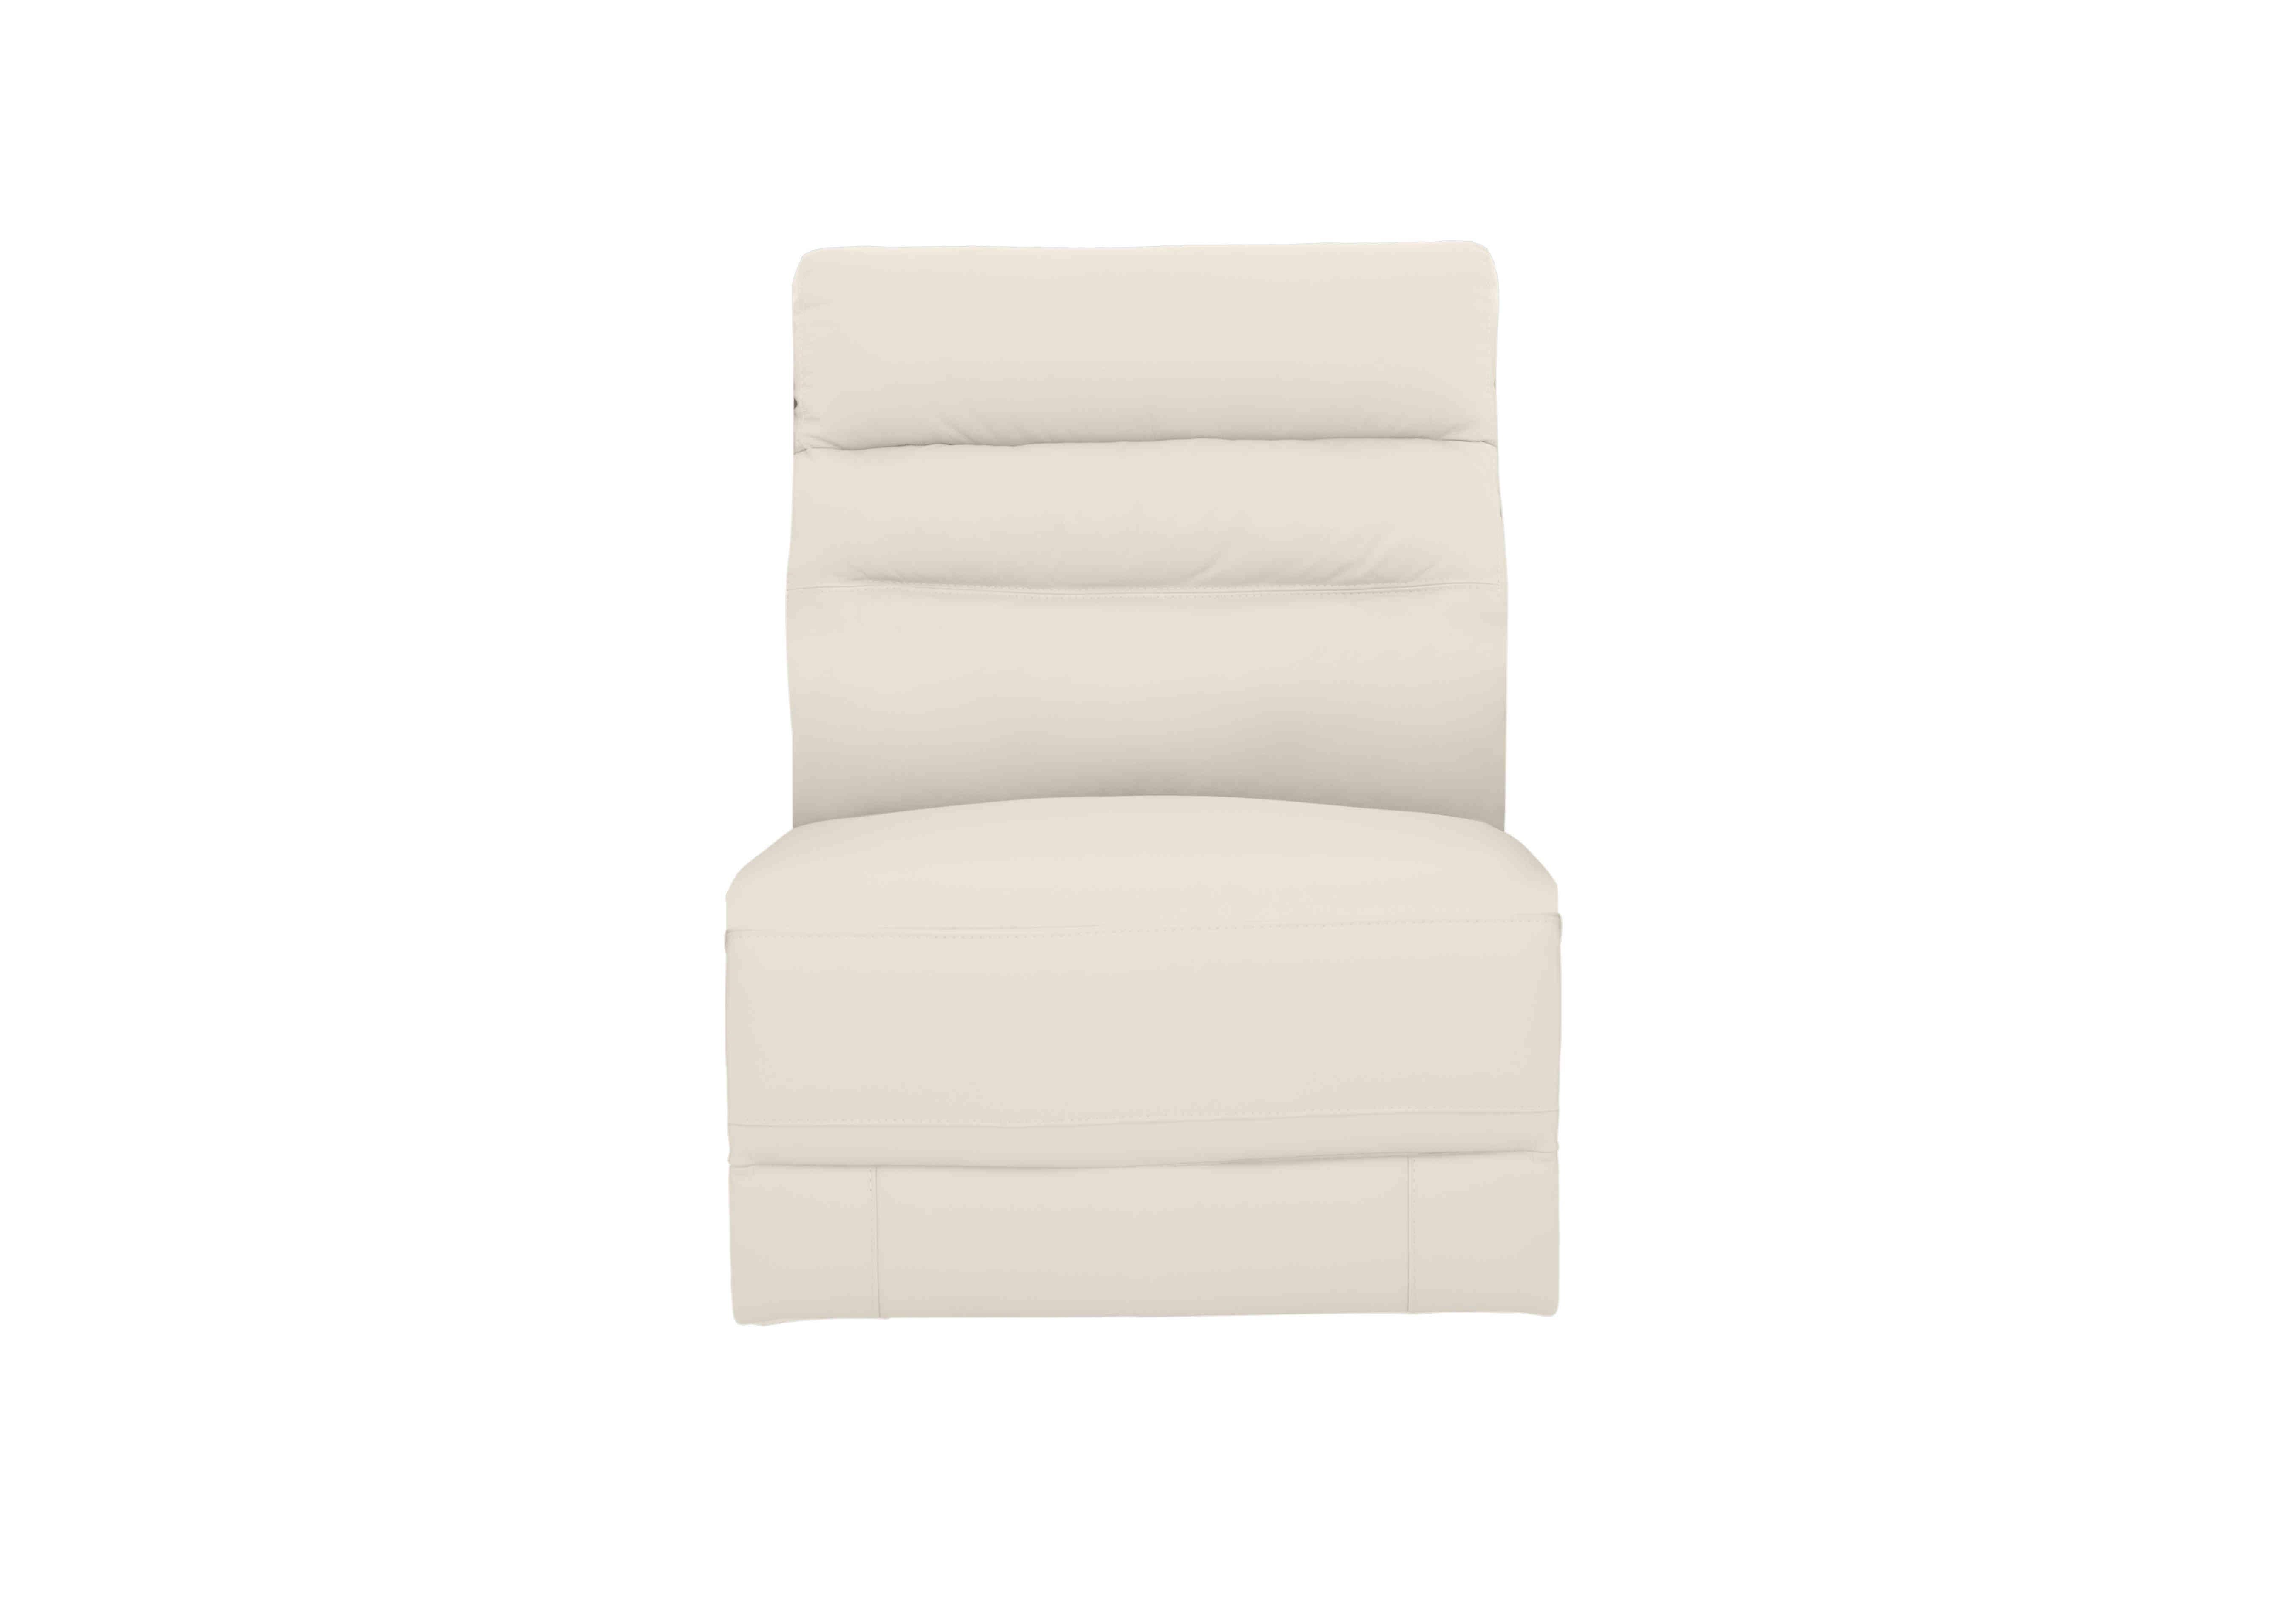 Berlin Leather Armless Unit in White Le-9307 on Furniture Village